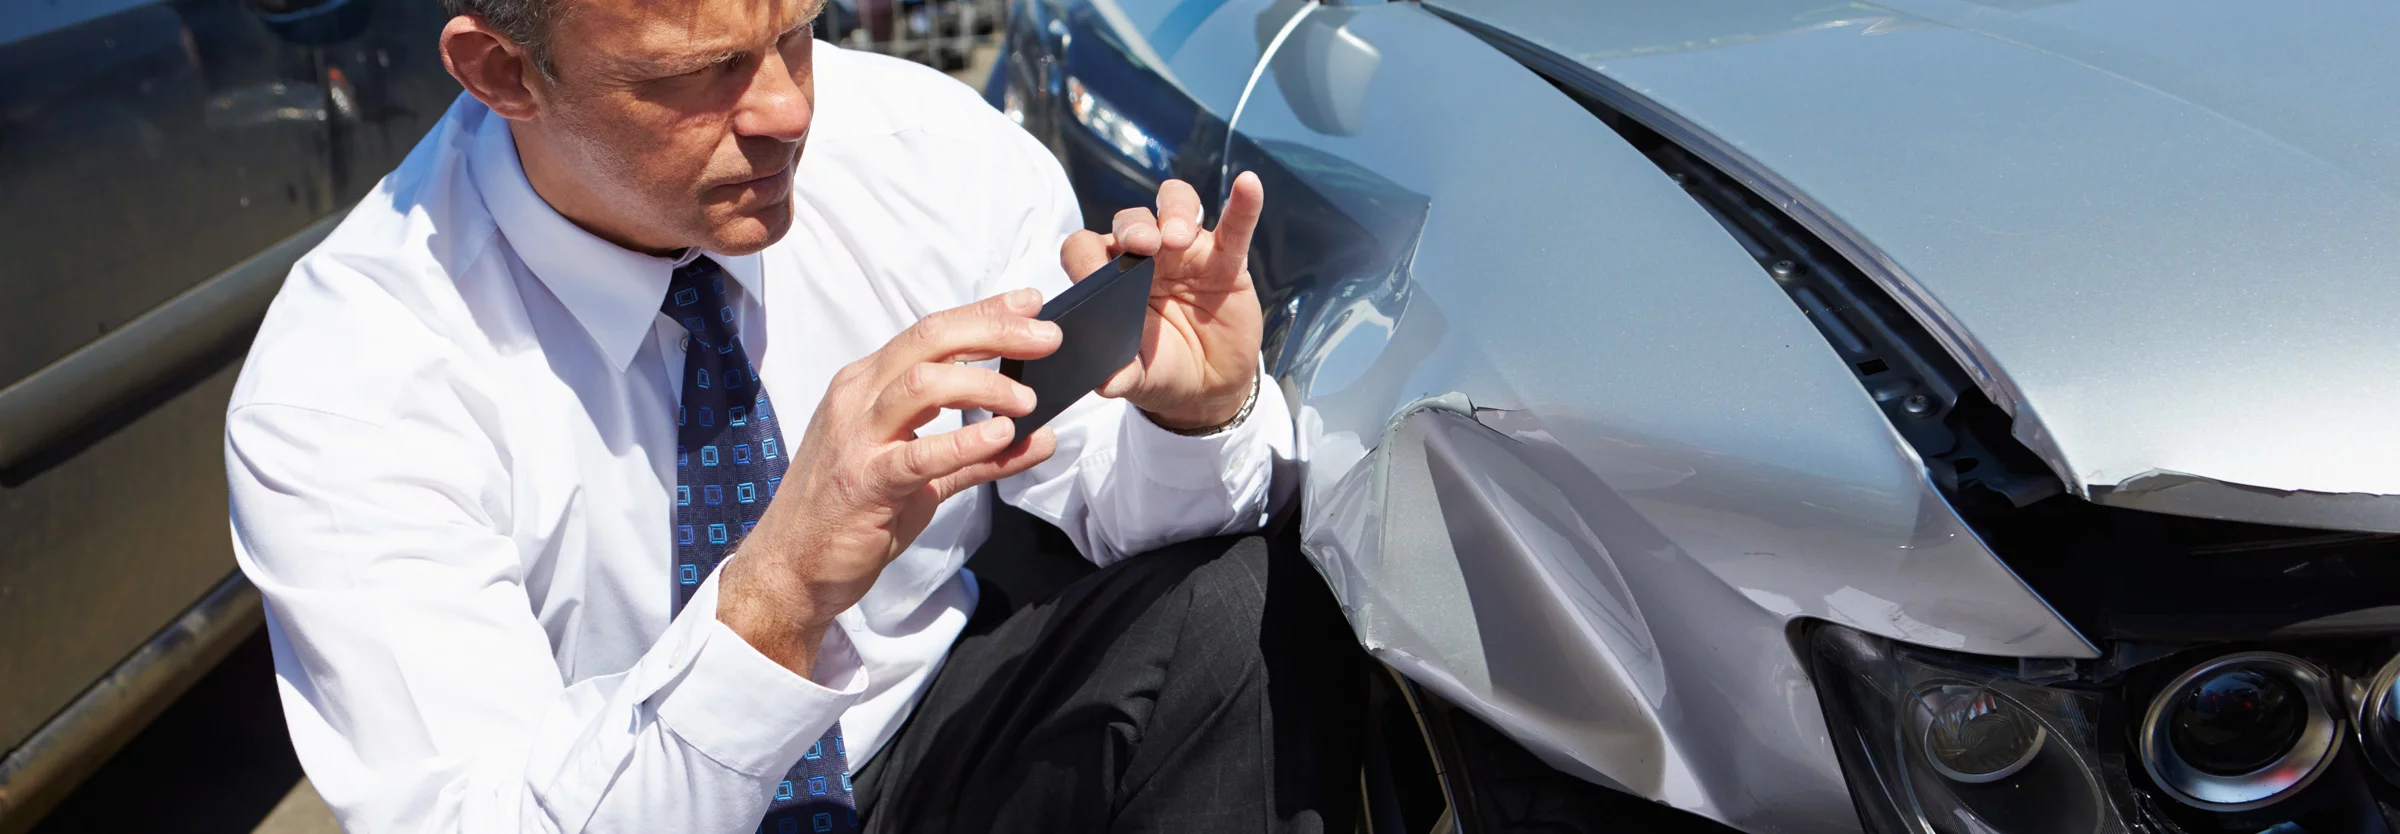 Top 3 Trends Driving Excessive Insurance Claims Costs